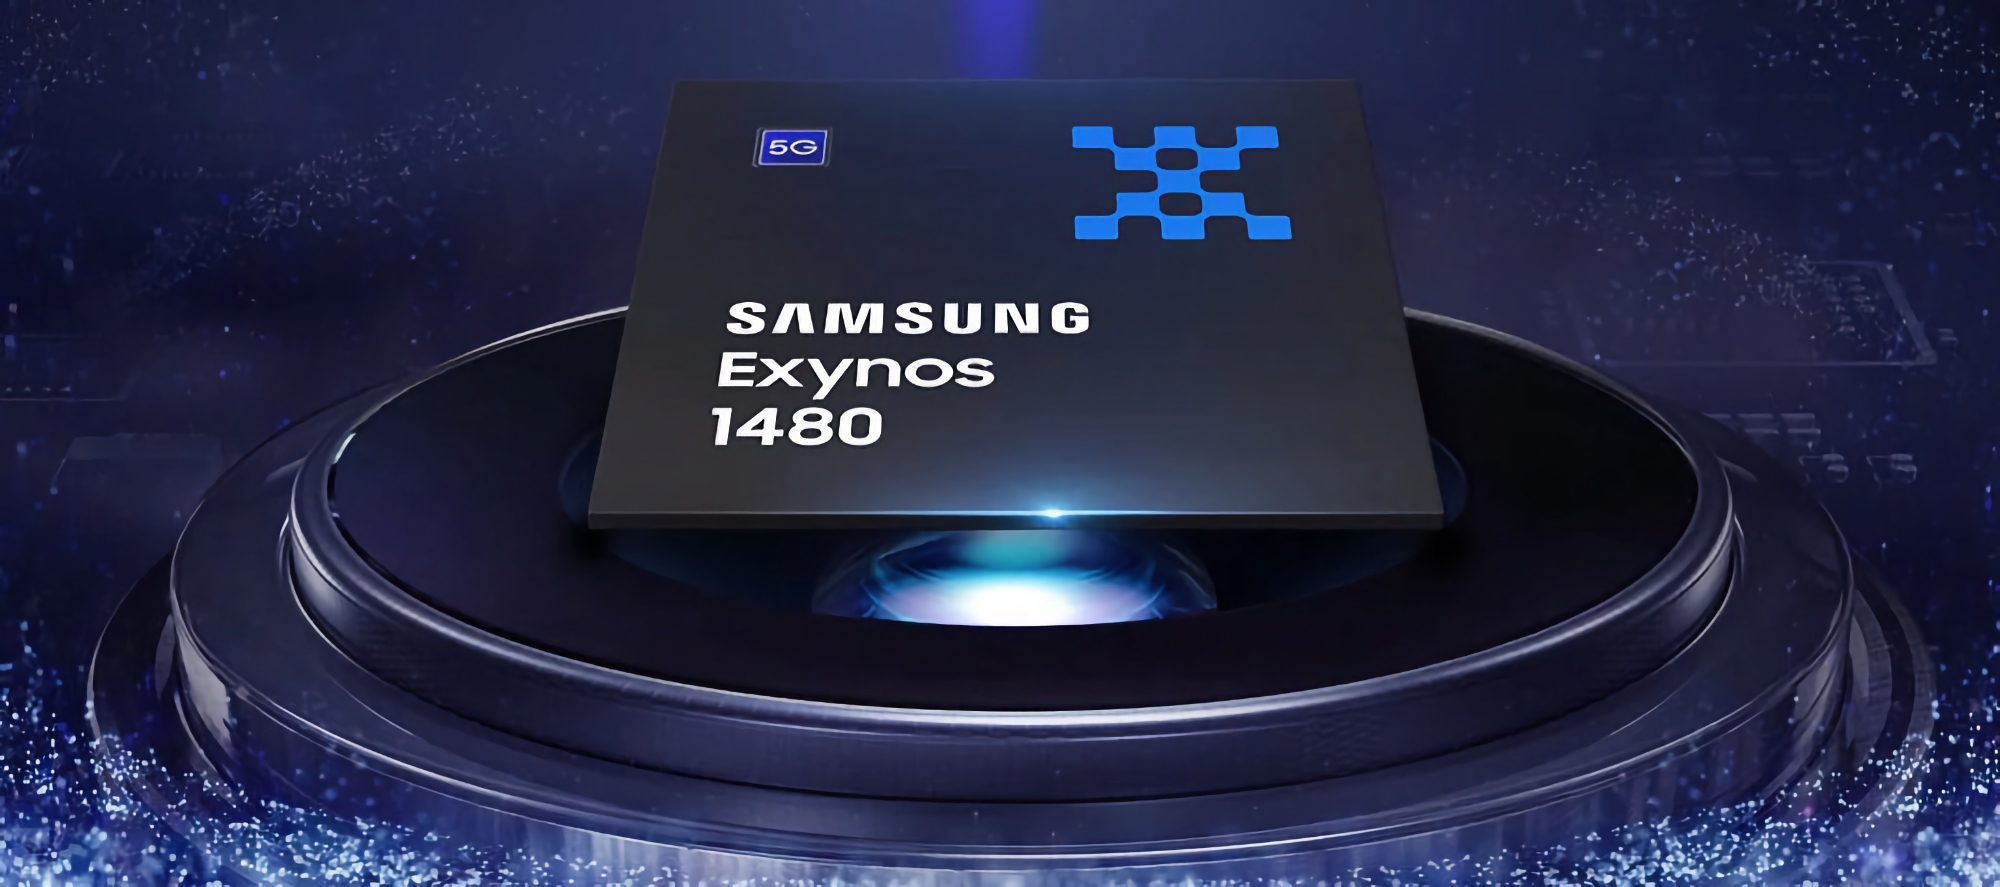 Samsung has revealed the specifications of the Exynos 1480 chip: eight cores, 4 nanometres and Xclipse 530 graphics with AMD RDNA 2 architecture